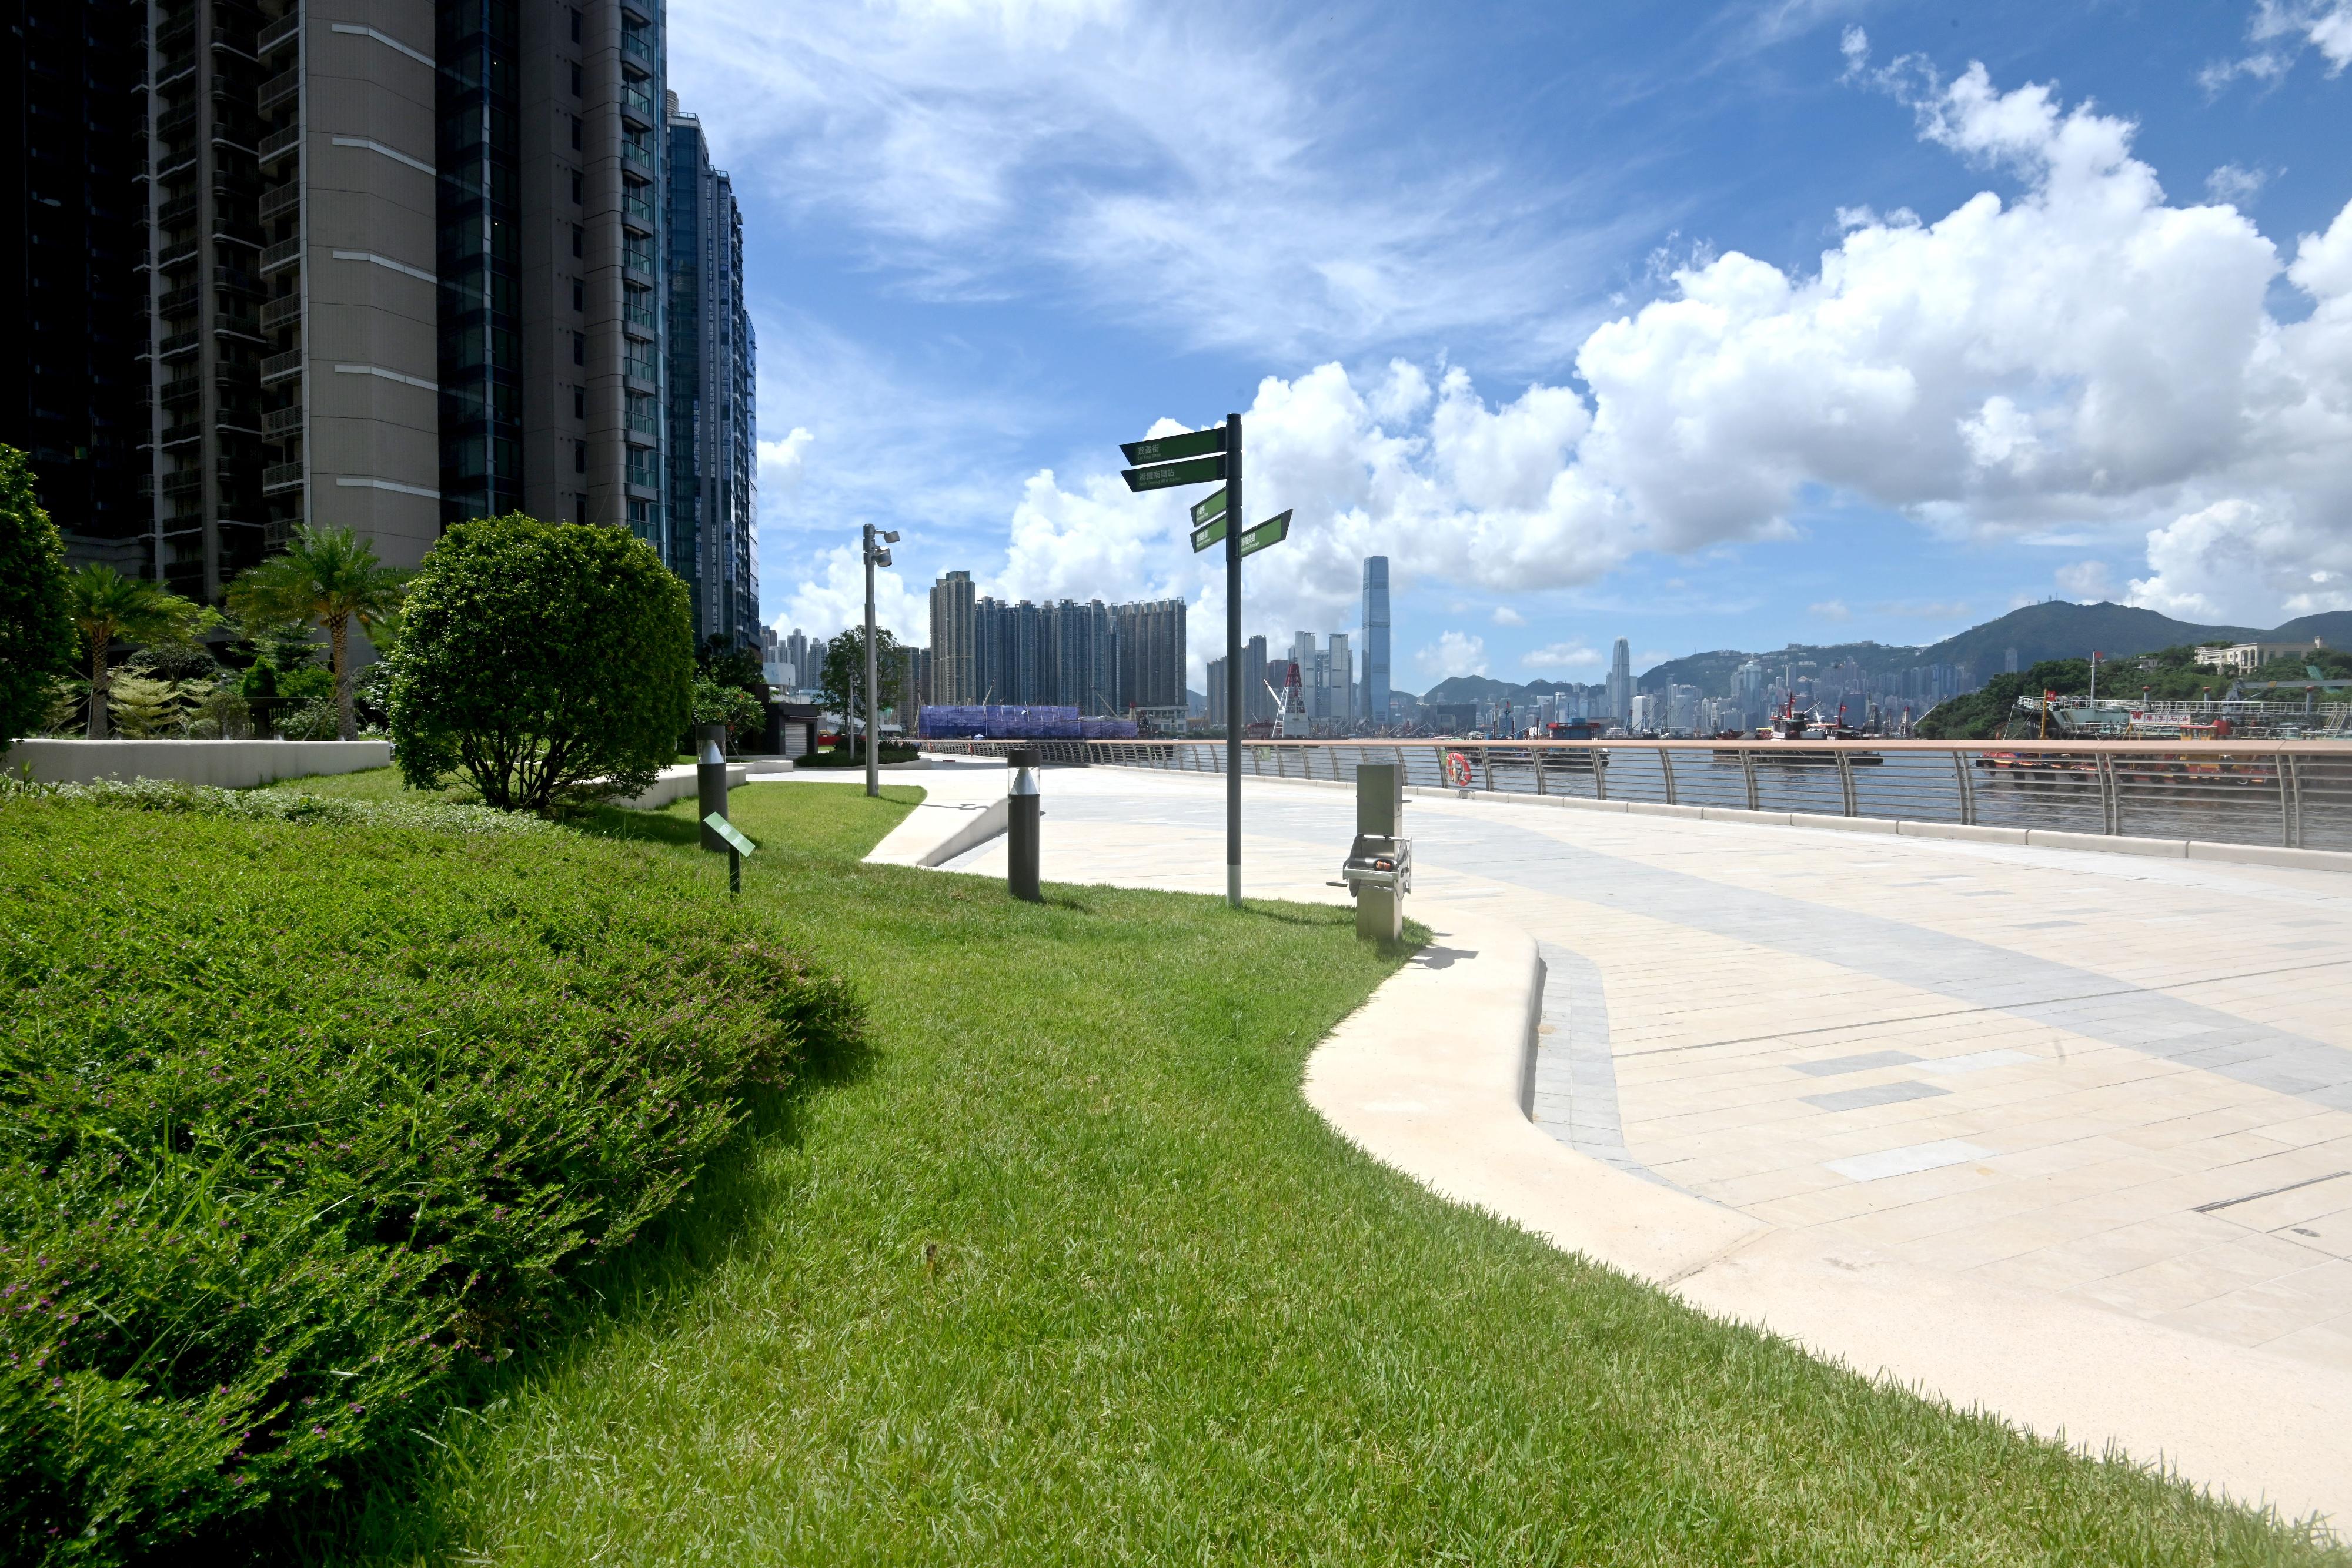 The Leisure and Cultural Services Department announced today (July 14) that the newly built Cheung Sha Wan Promenade is now fully opened for public use. The Promenade is the first waterfront open space in Sham Shui Po District, providing a pleasant and relaxing leisure space with a spectacular promenade for public enjoyment.

